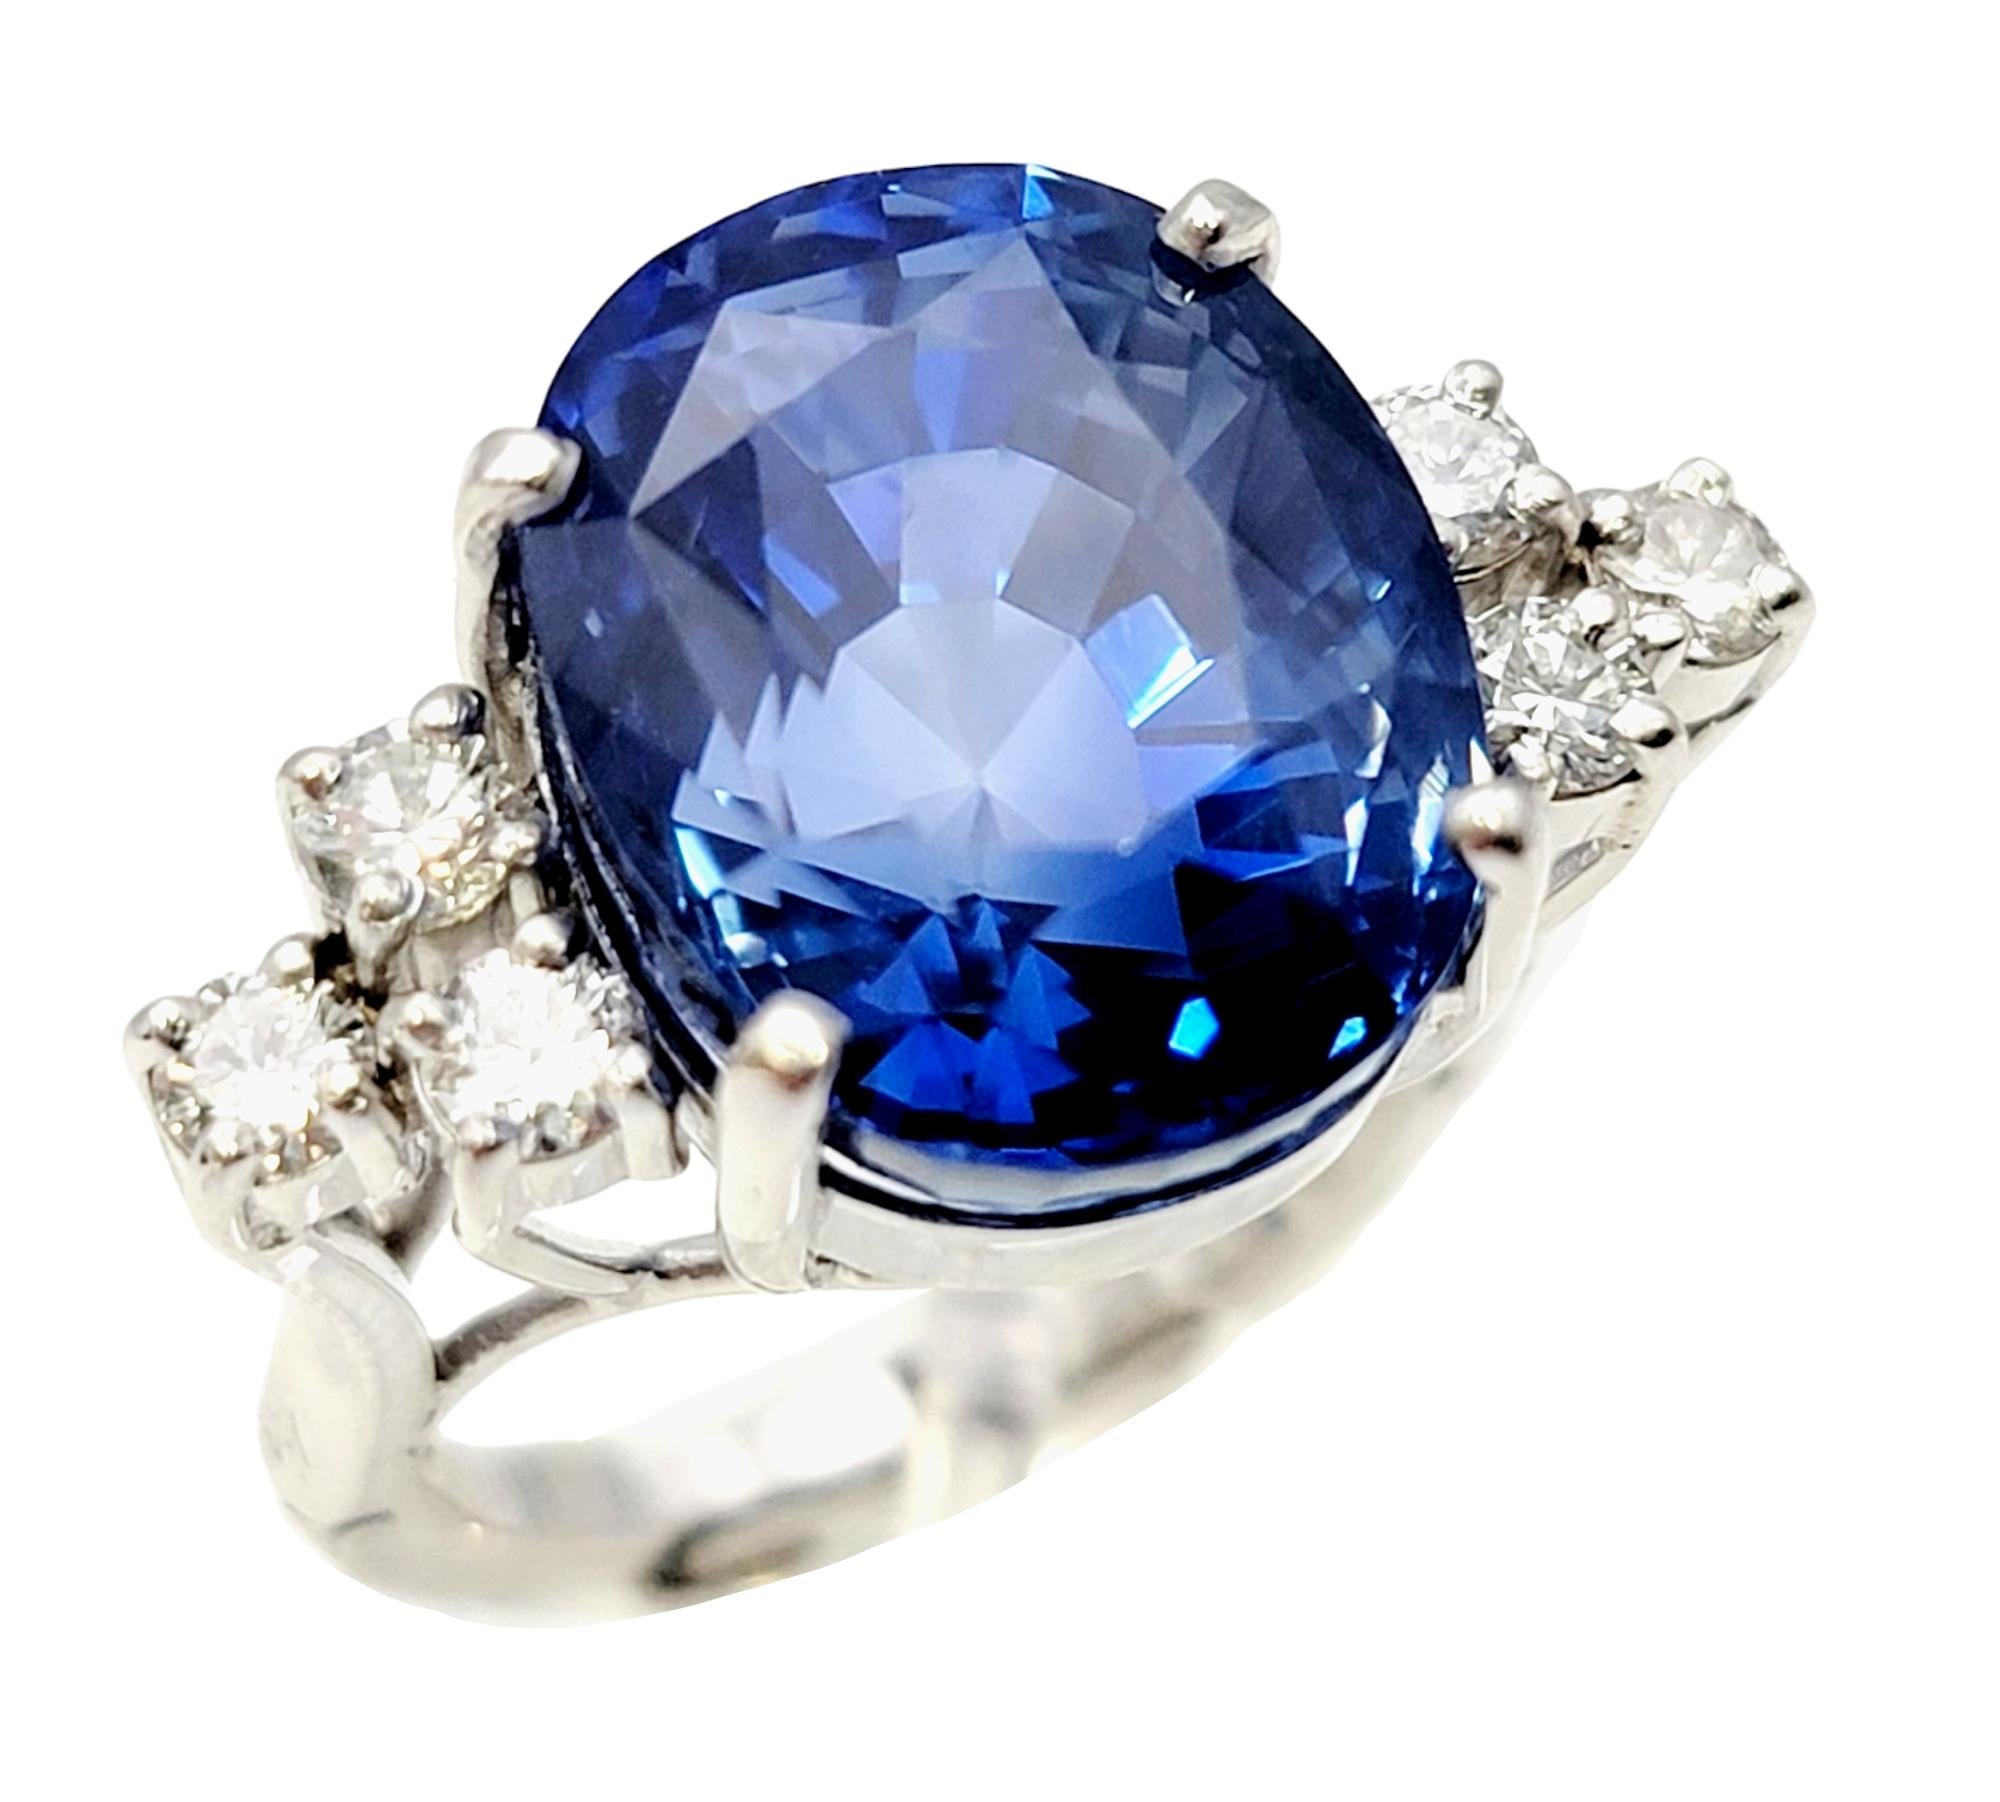 Impressive 15.35 Carat Rare Untreated Oval Ceylon Sapphire and Diamond Ring In Excellent Condition For Sale In Scottsdale, AZ